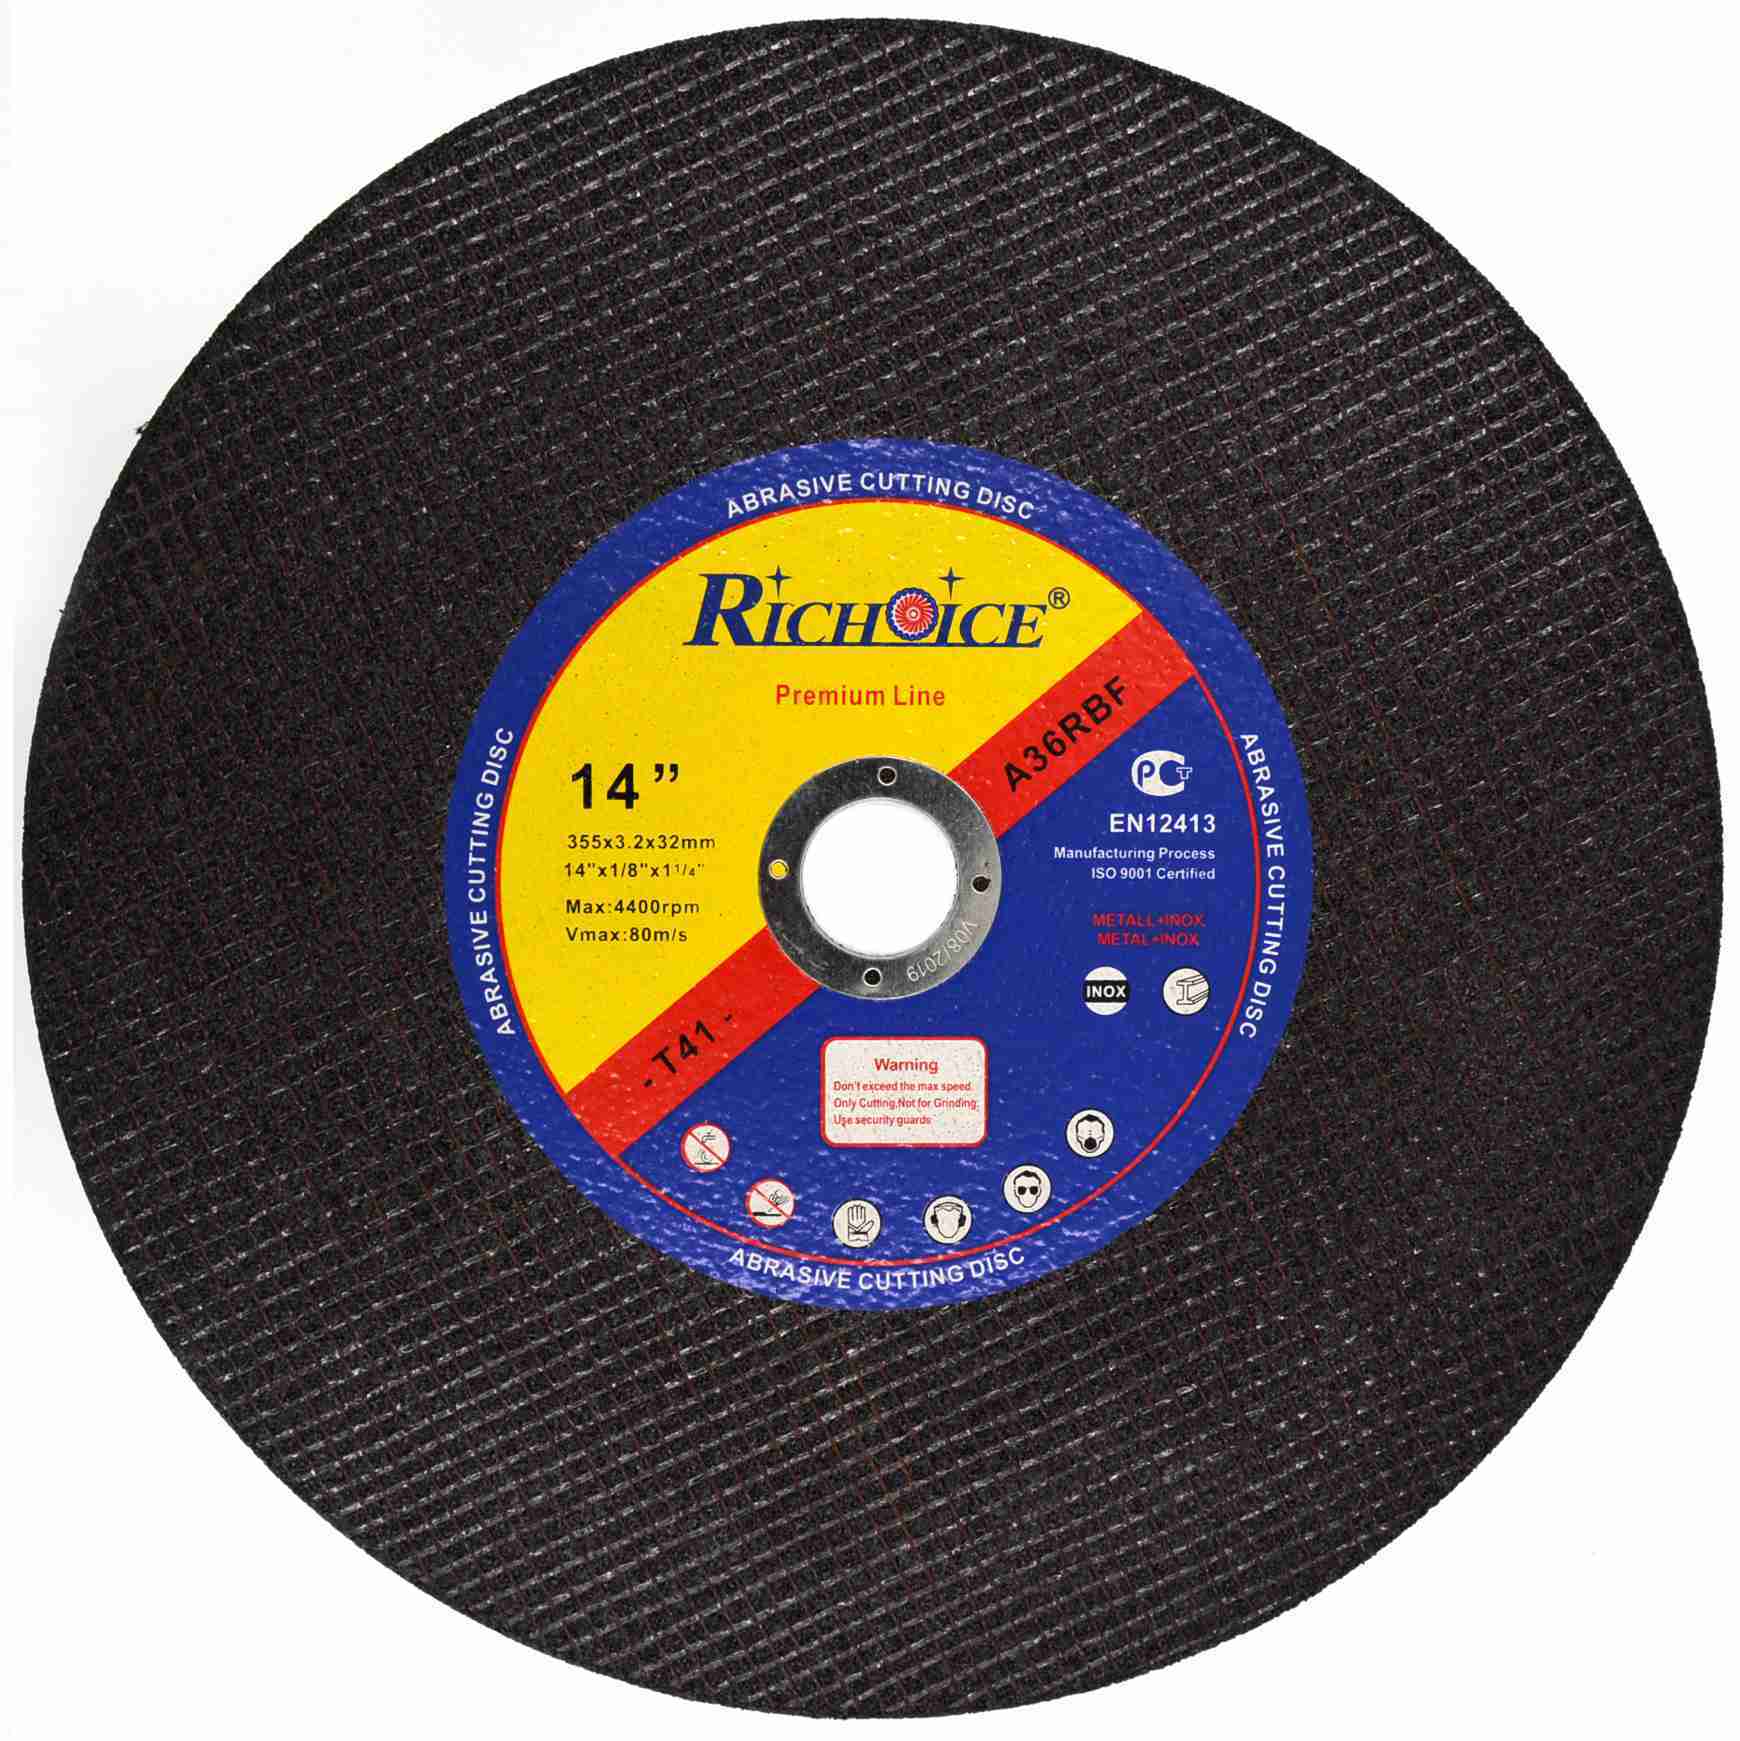 Abrasive cutting disc 355*2.5*25.4mm 14inch for Metal Angle Grinder Cut Off Wheel Large Abrasive Cutting Wheel